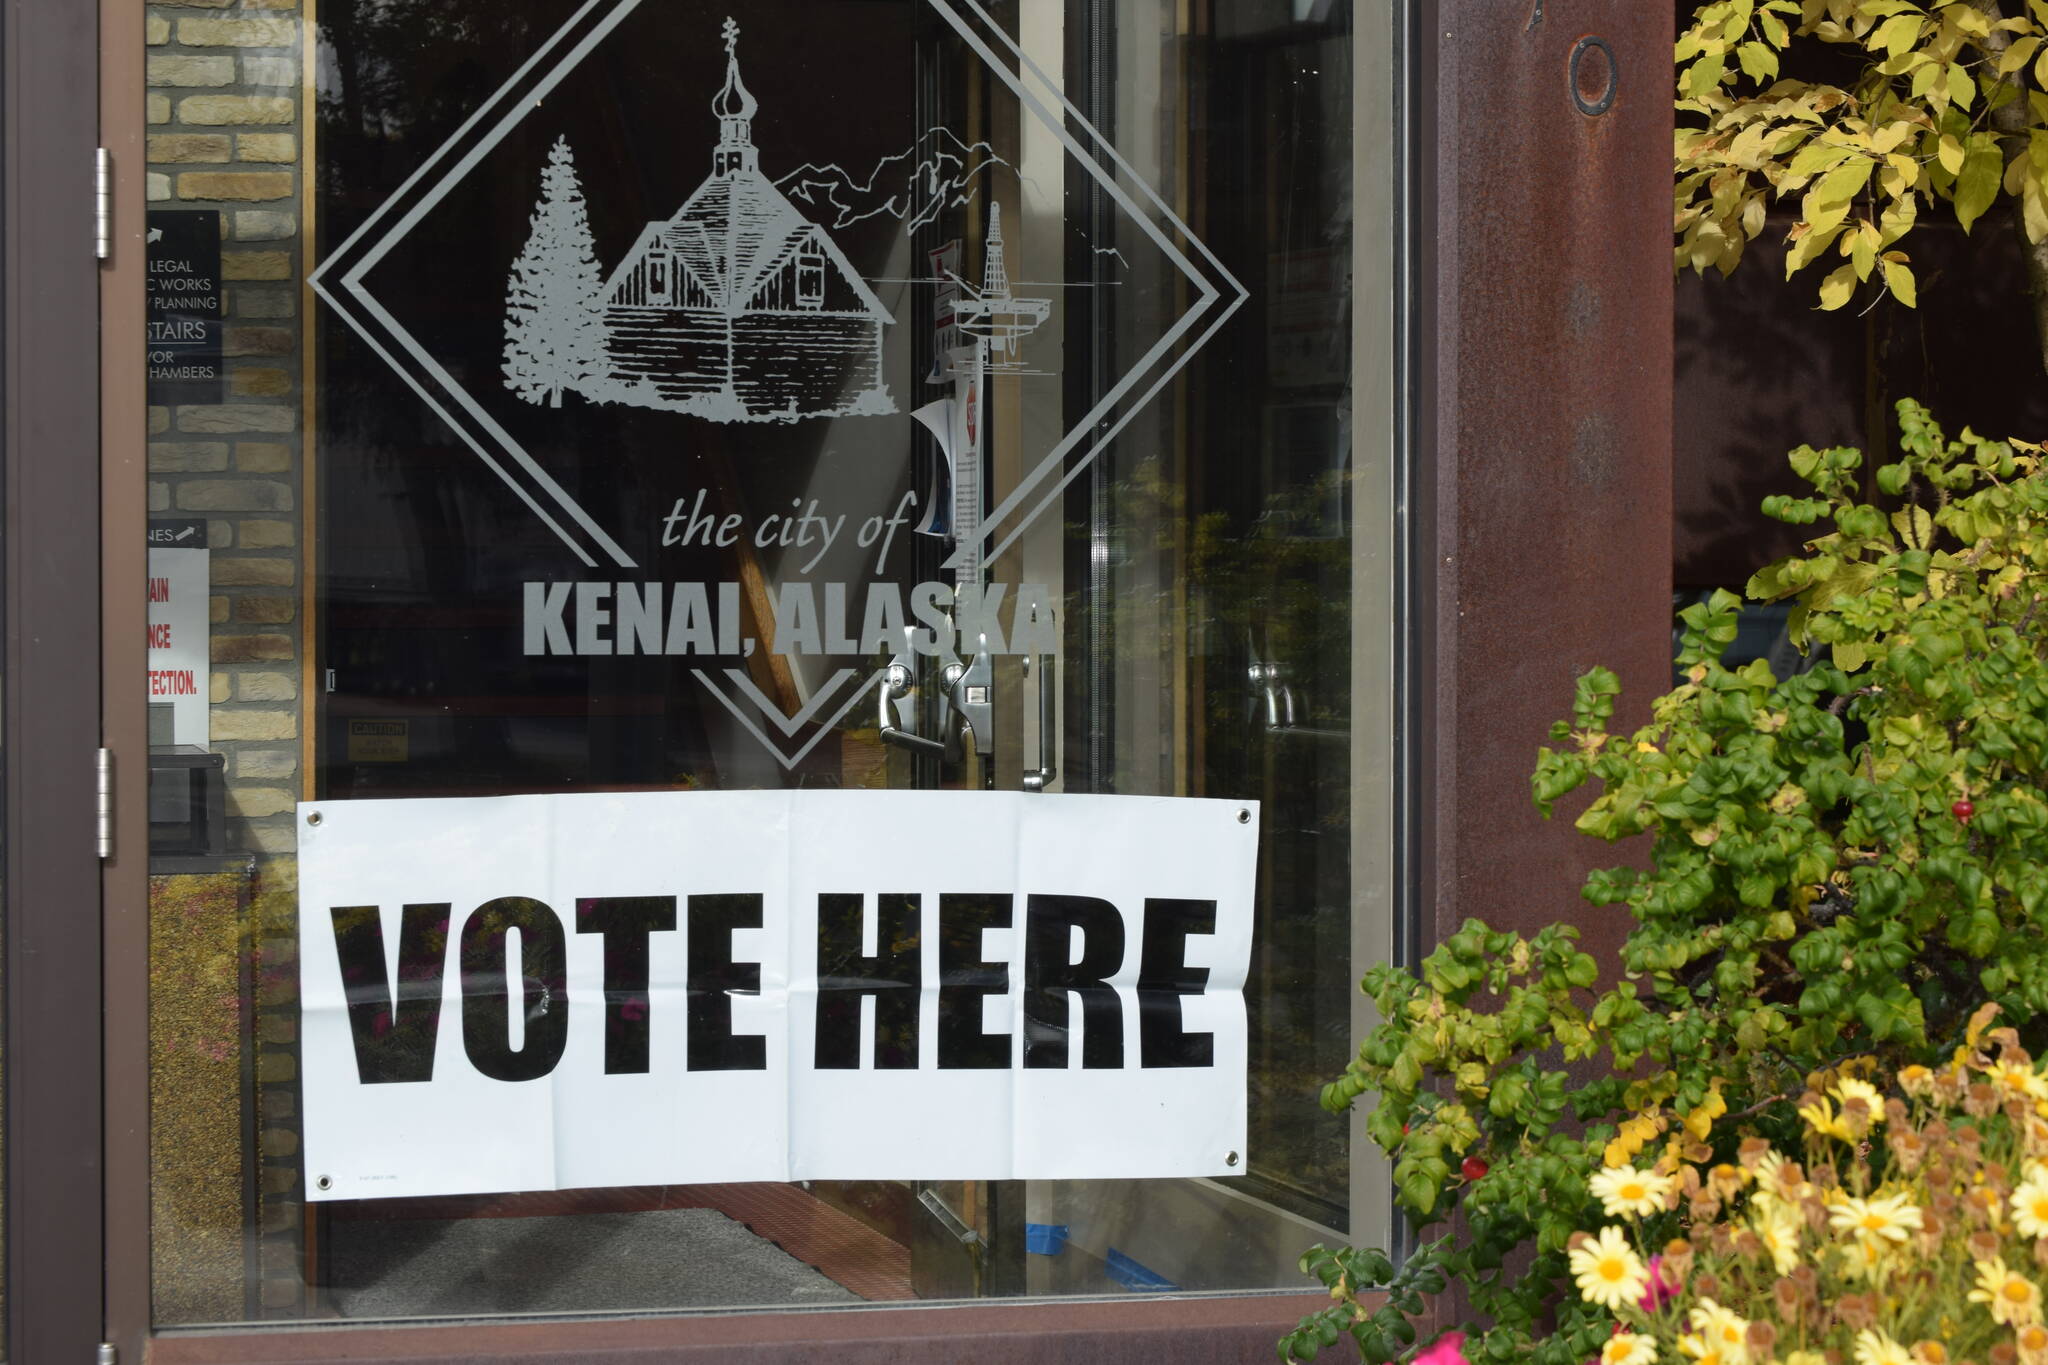 A “Vote Here” sign is seen at the City of Kenai building on Monday, Sept. 21, 2020, in Kenai, Alaska. (File)